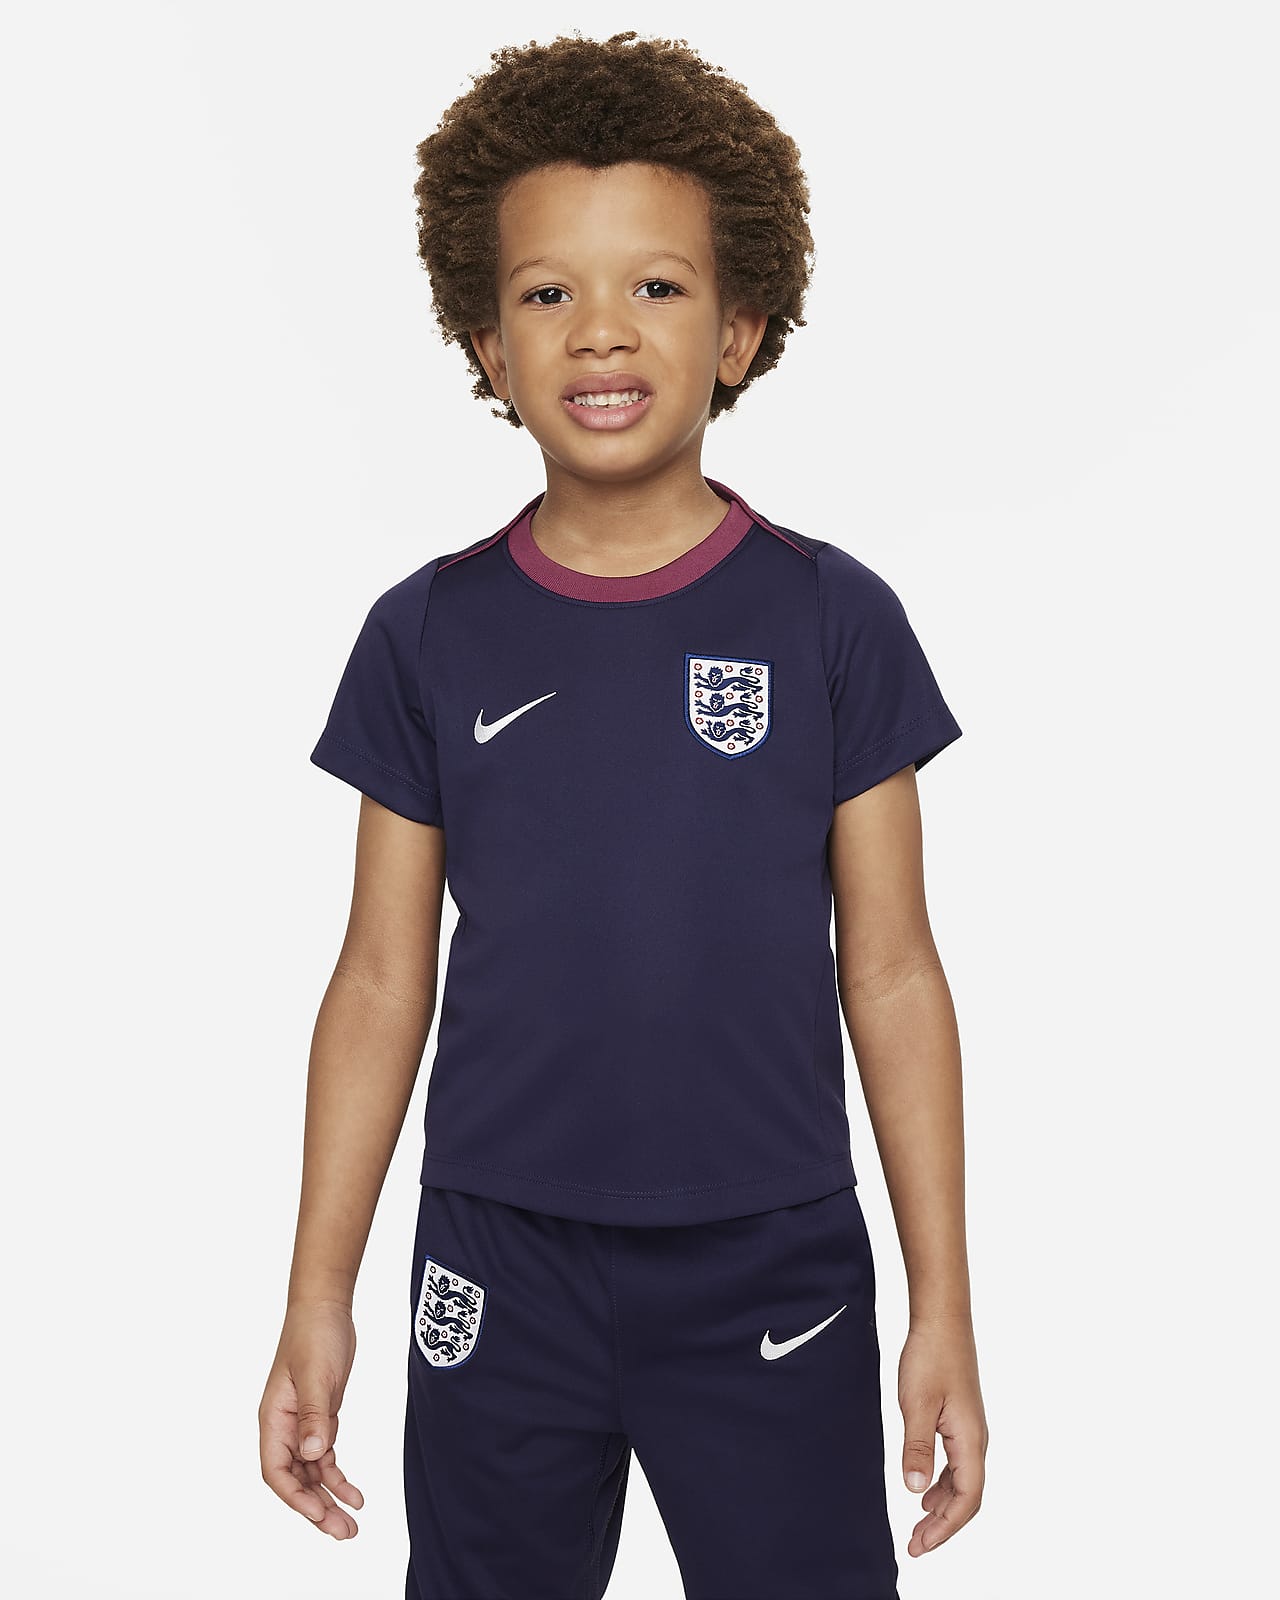 England Academy Pro Younger Kids' Nike Dri-FIT Football Short-Sleeve Top